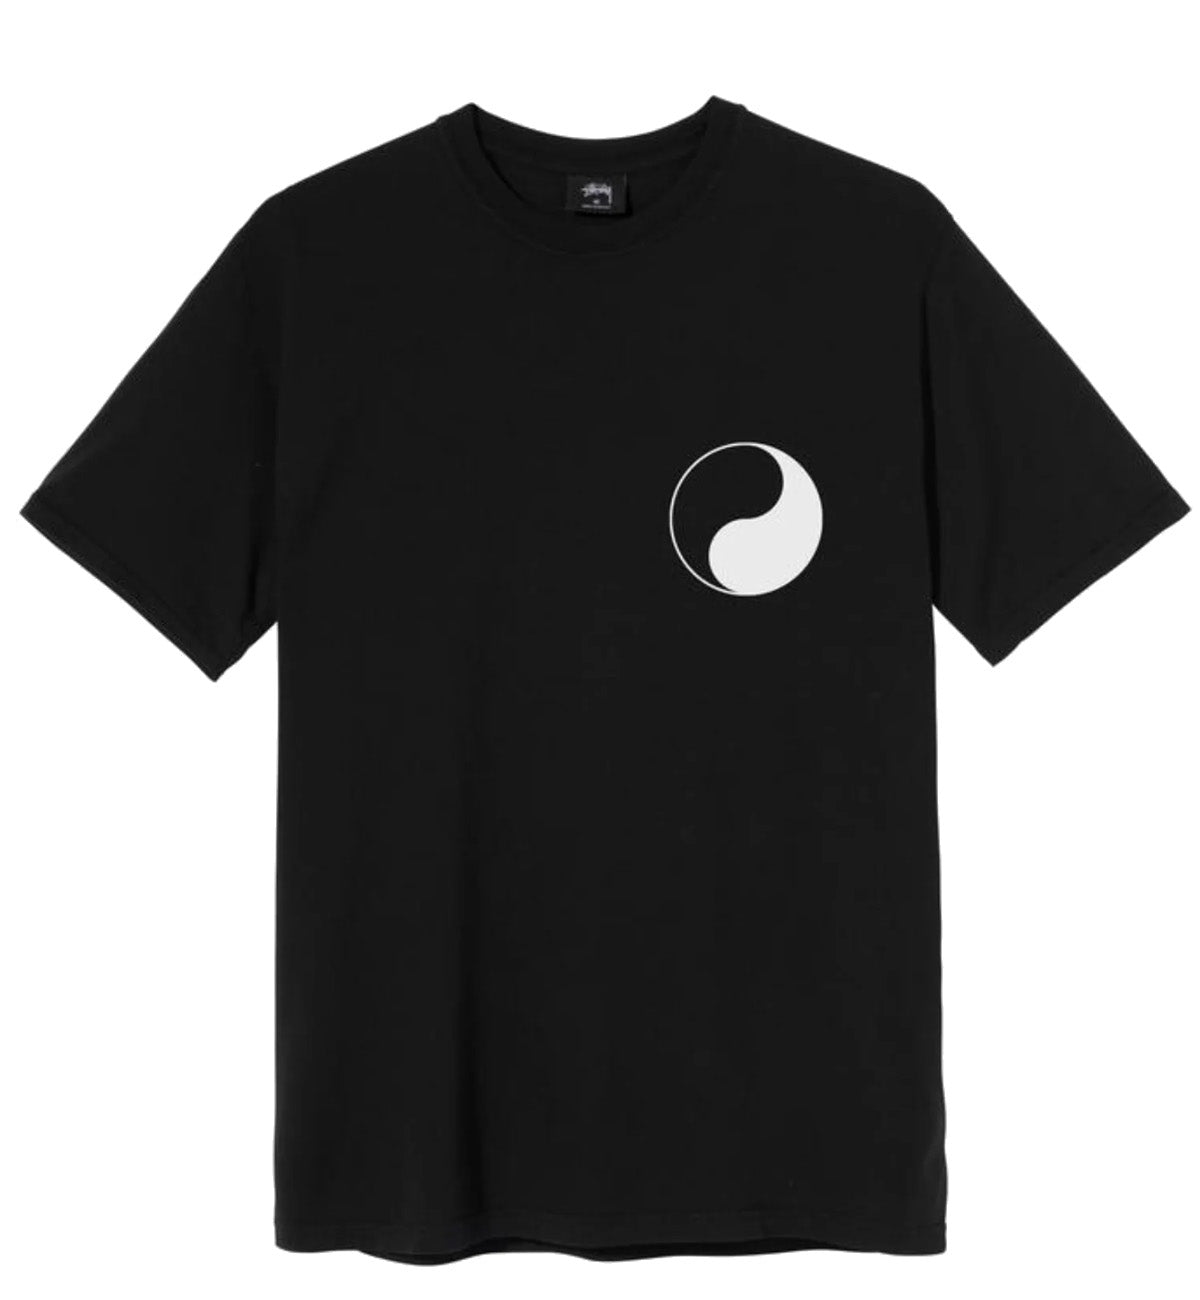 Stussy x Our Legacy Ying Yang Dyed Tee (Black)